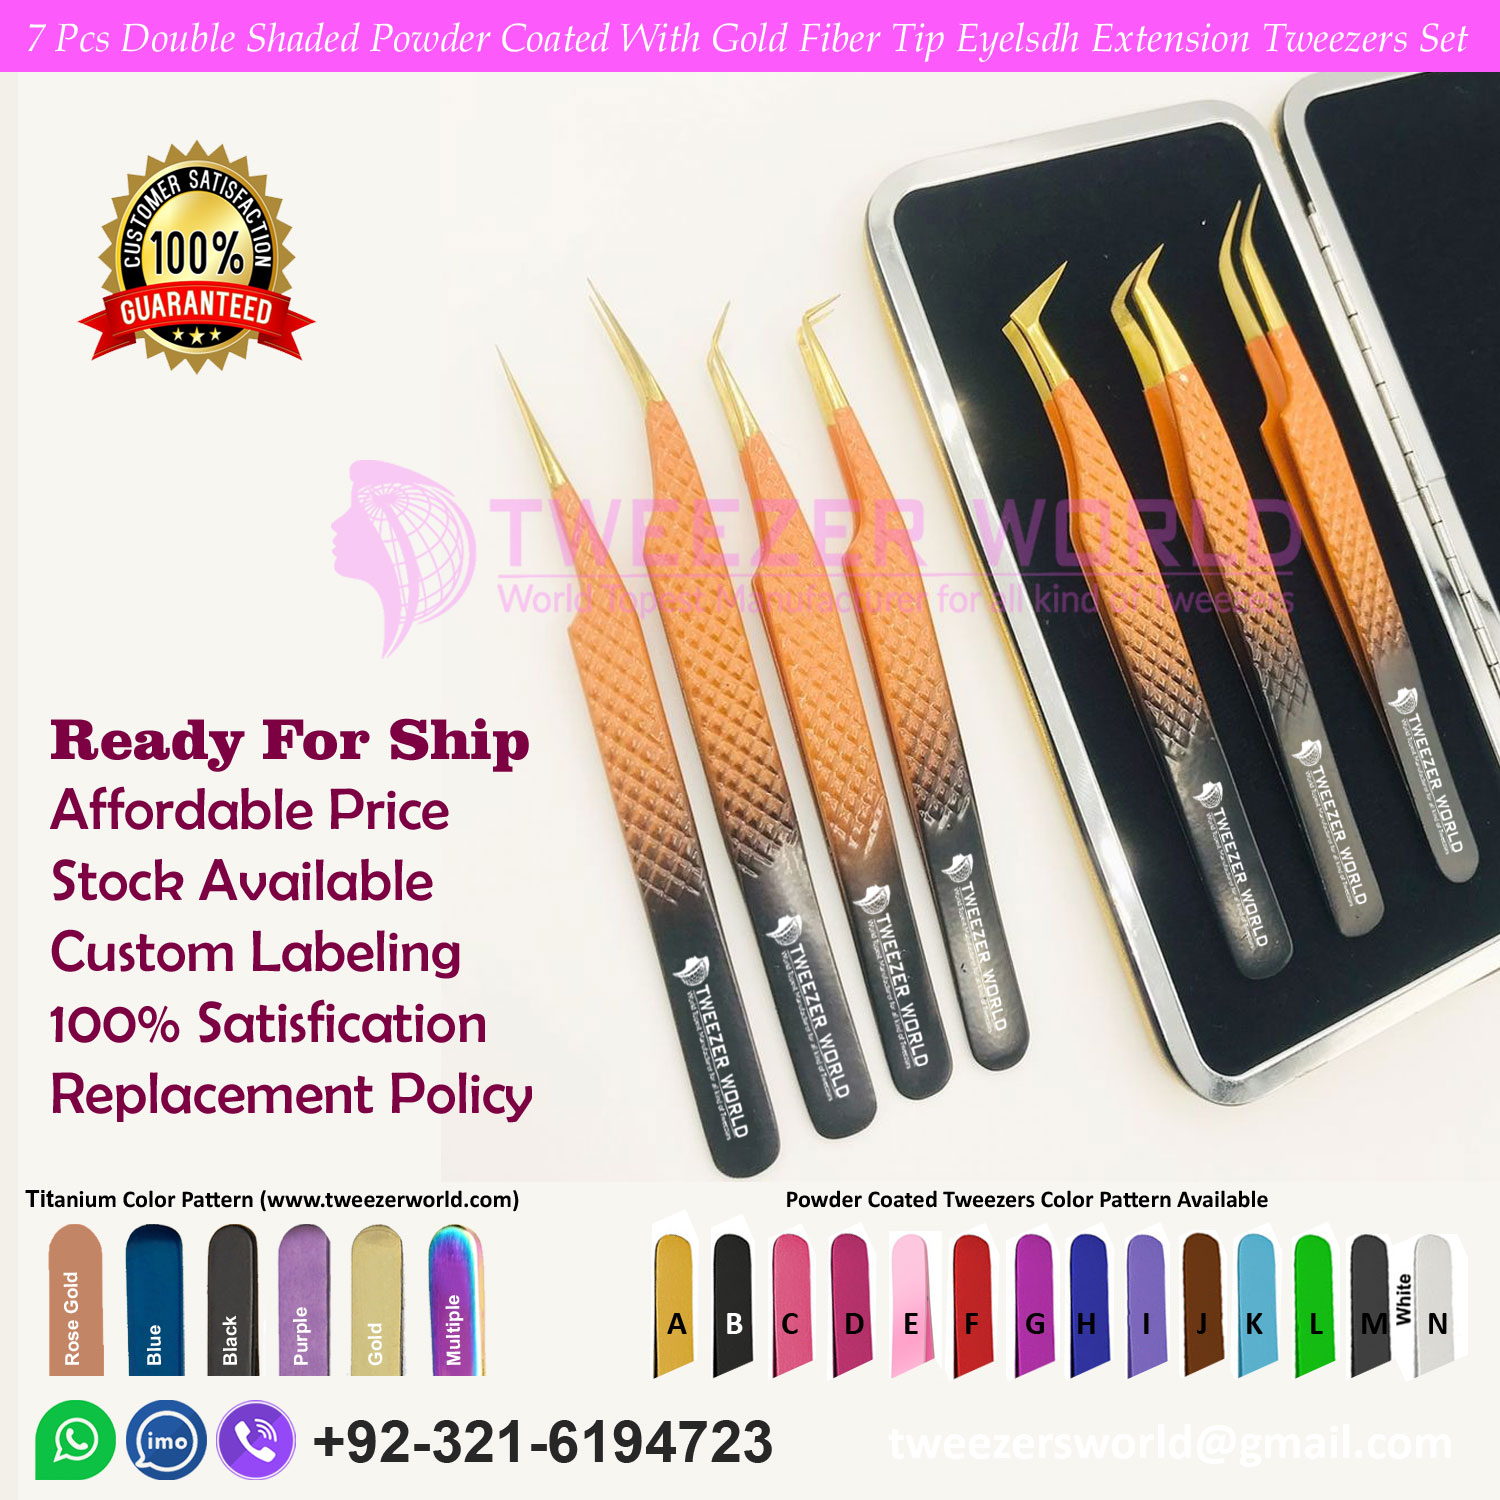 7 Pcs Double Shaded Powder Coated With Gold Fiber Tip Eyelash Extension Tweezers Set For Professionals